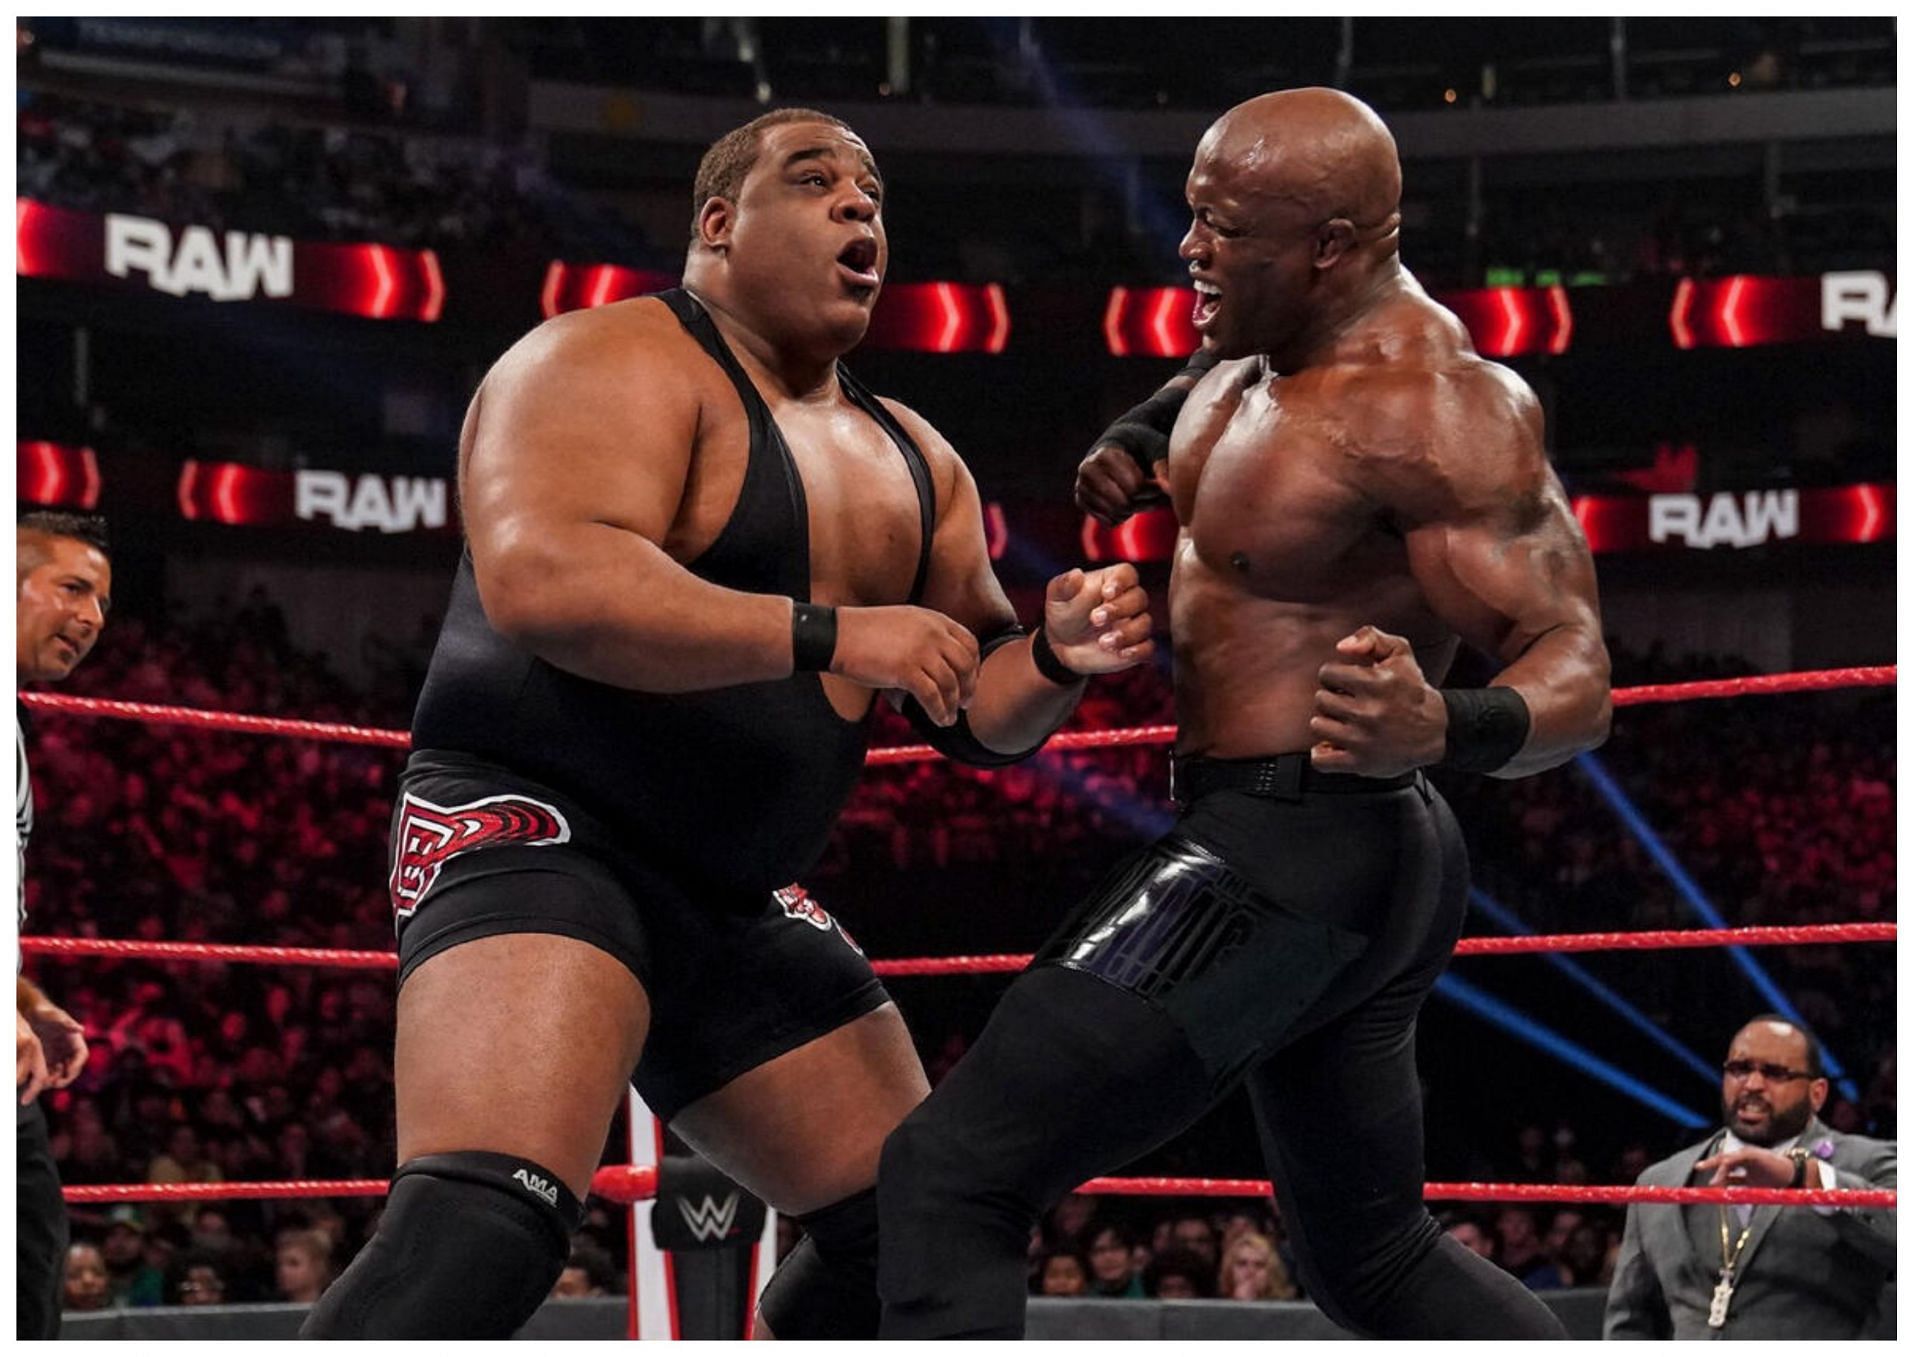 Keith Lee (left) spent three years with WWE (2018-2021) - Photo credit: WWE.com